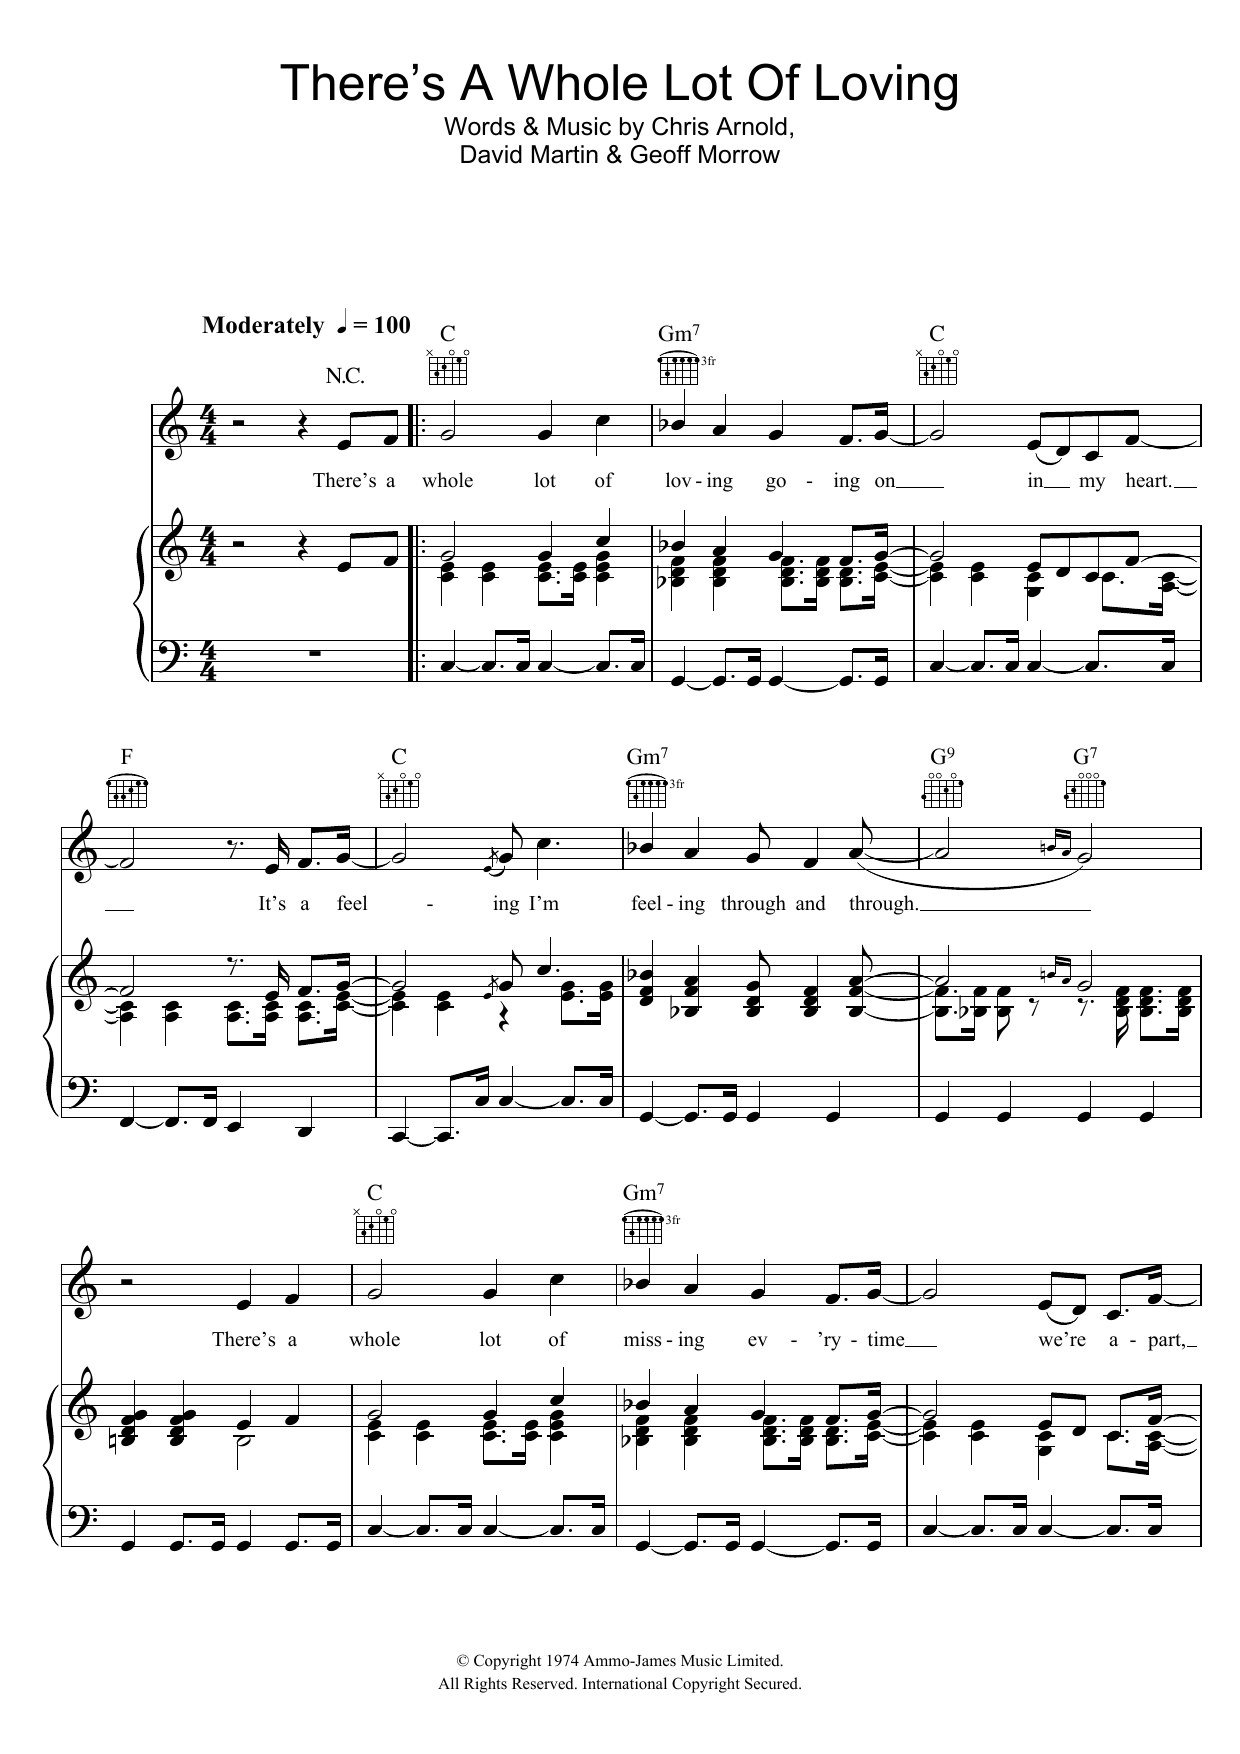 Download Guys 'n' Dolls There's A Whole Lot Of Loving Sheet Music